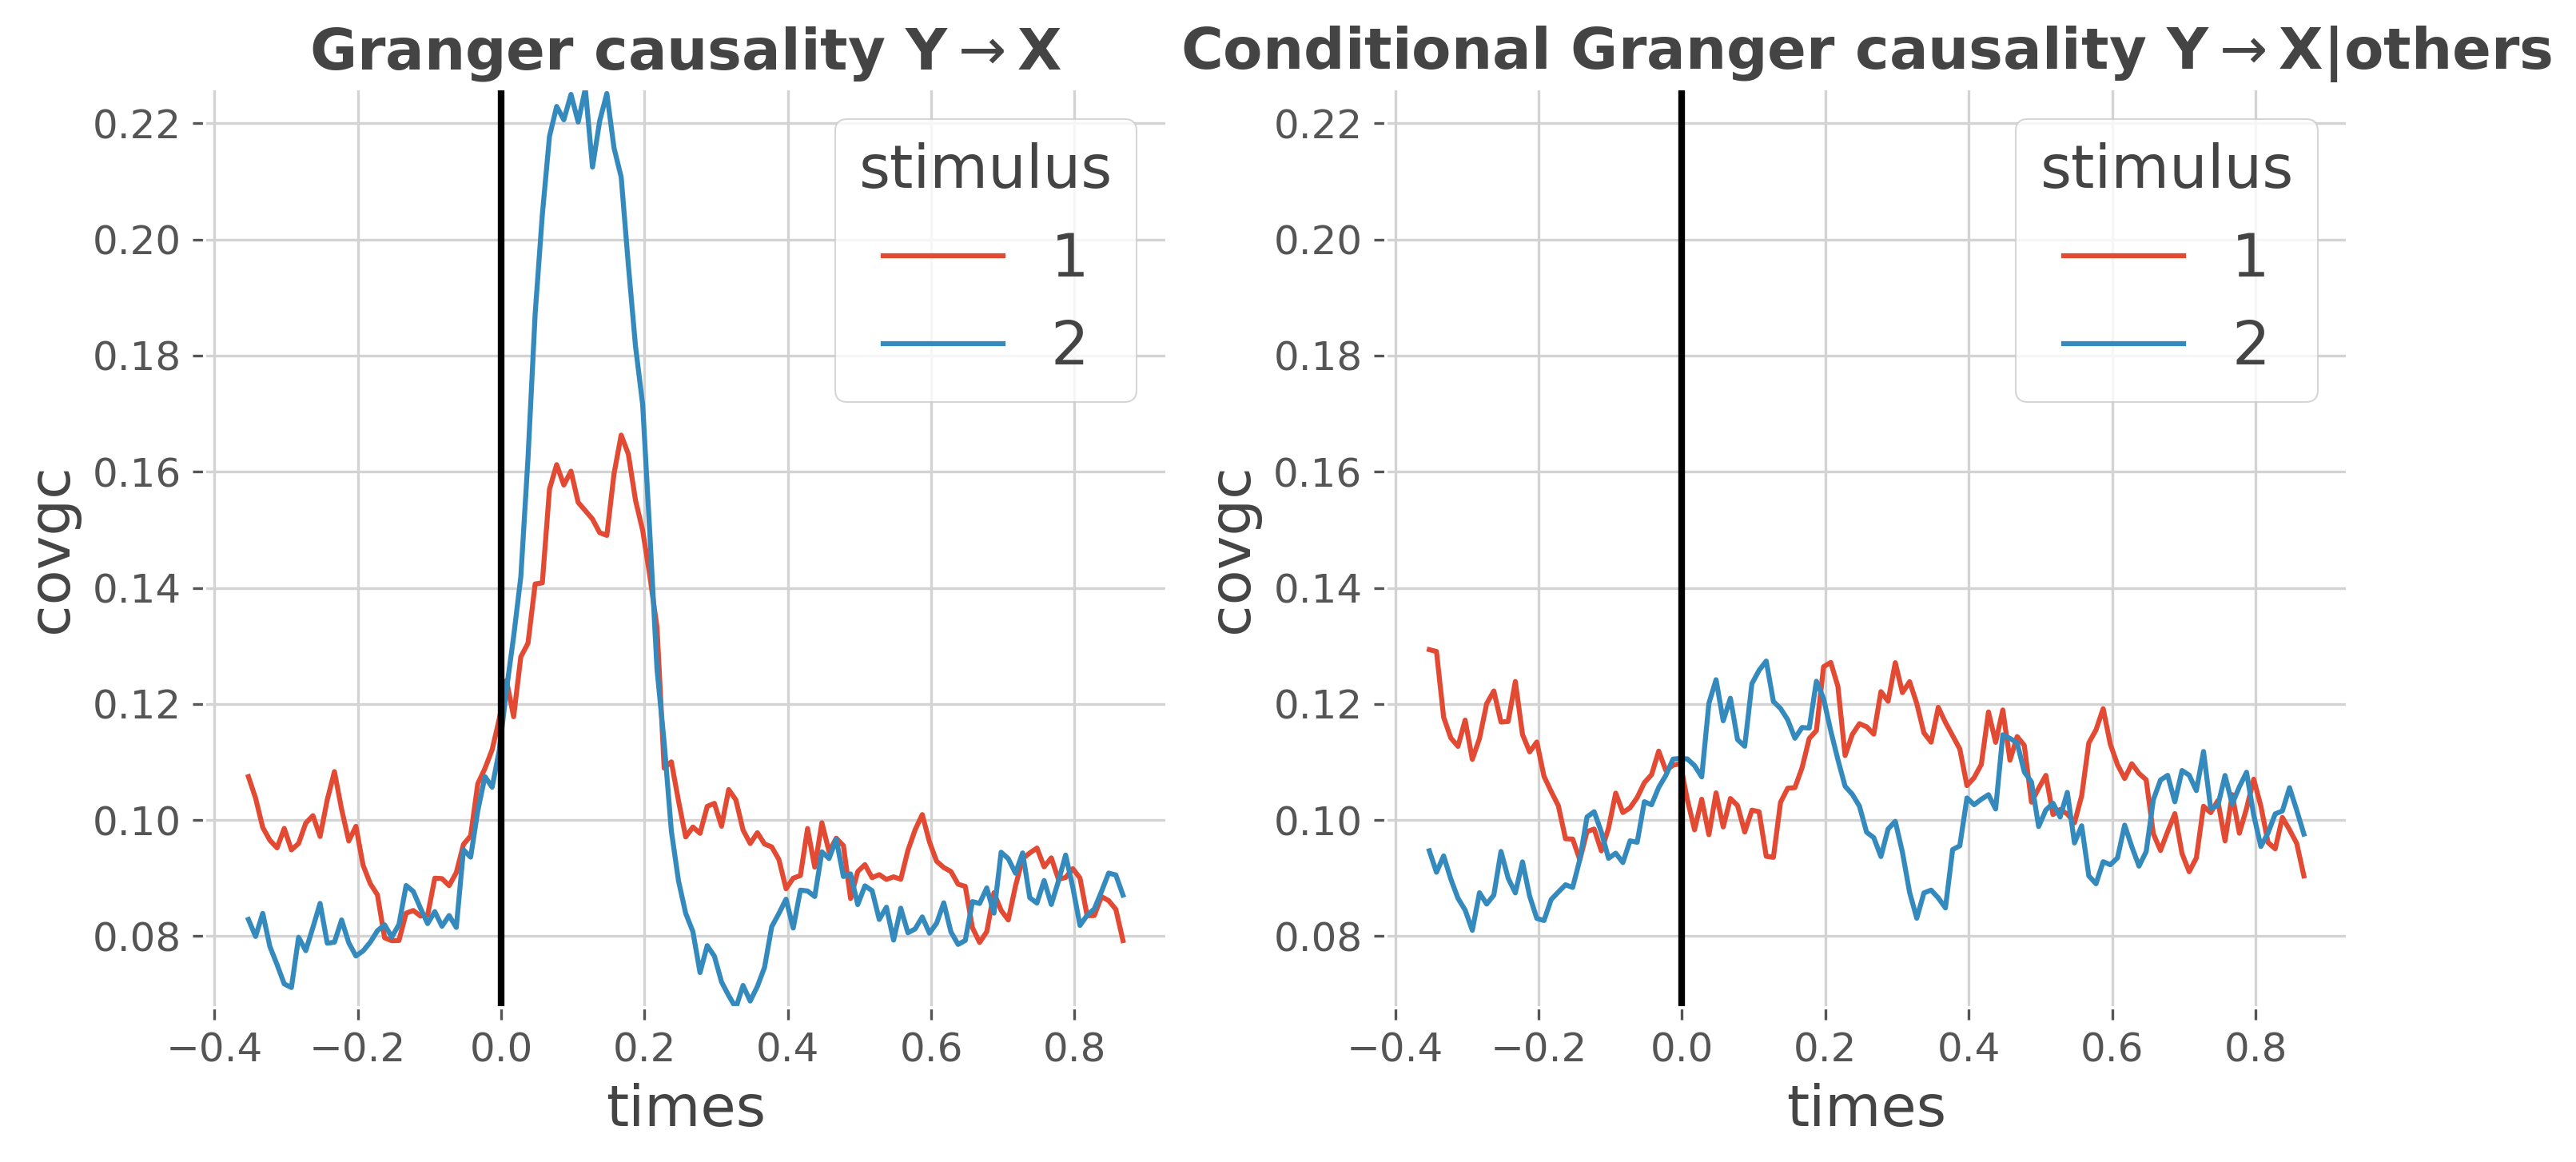 Granger causality Y$\rightarrow$X, Conditional Granger causality Y$\rightarrow$X|others